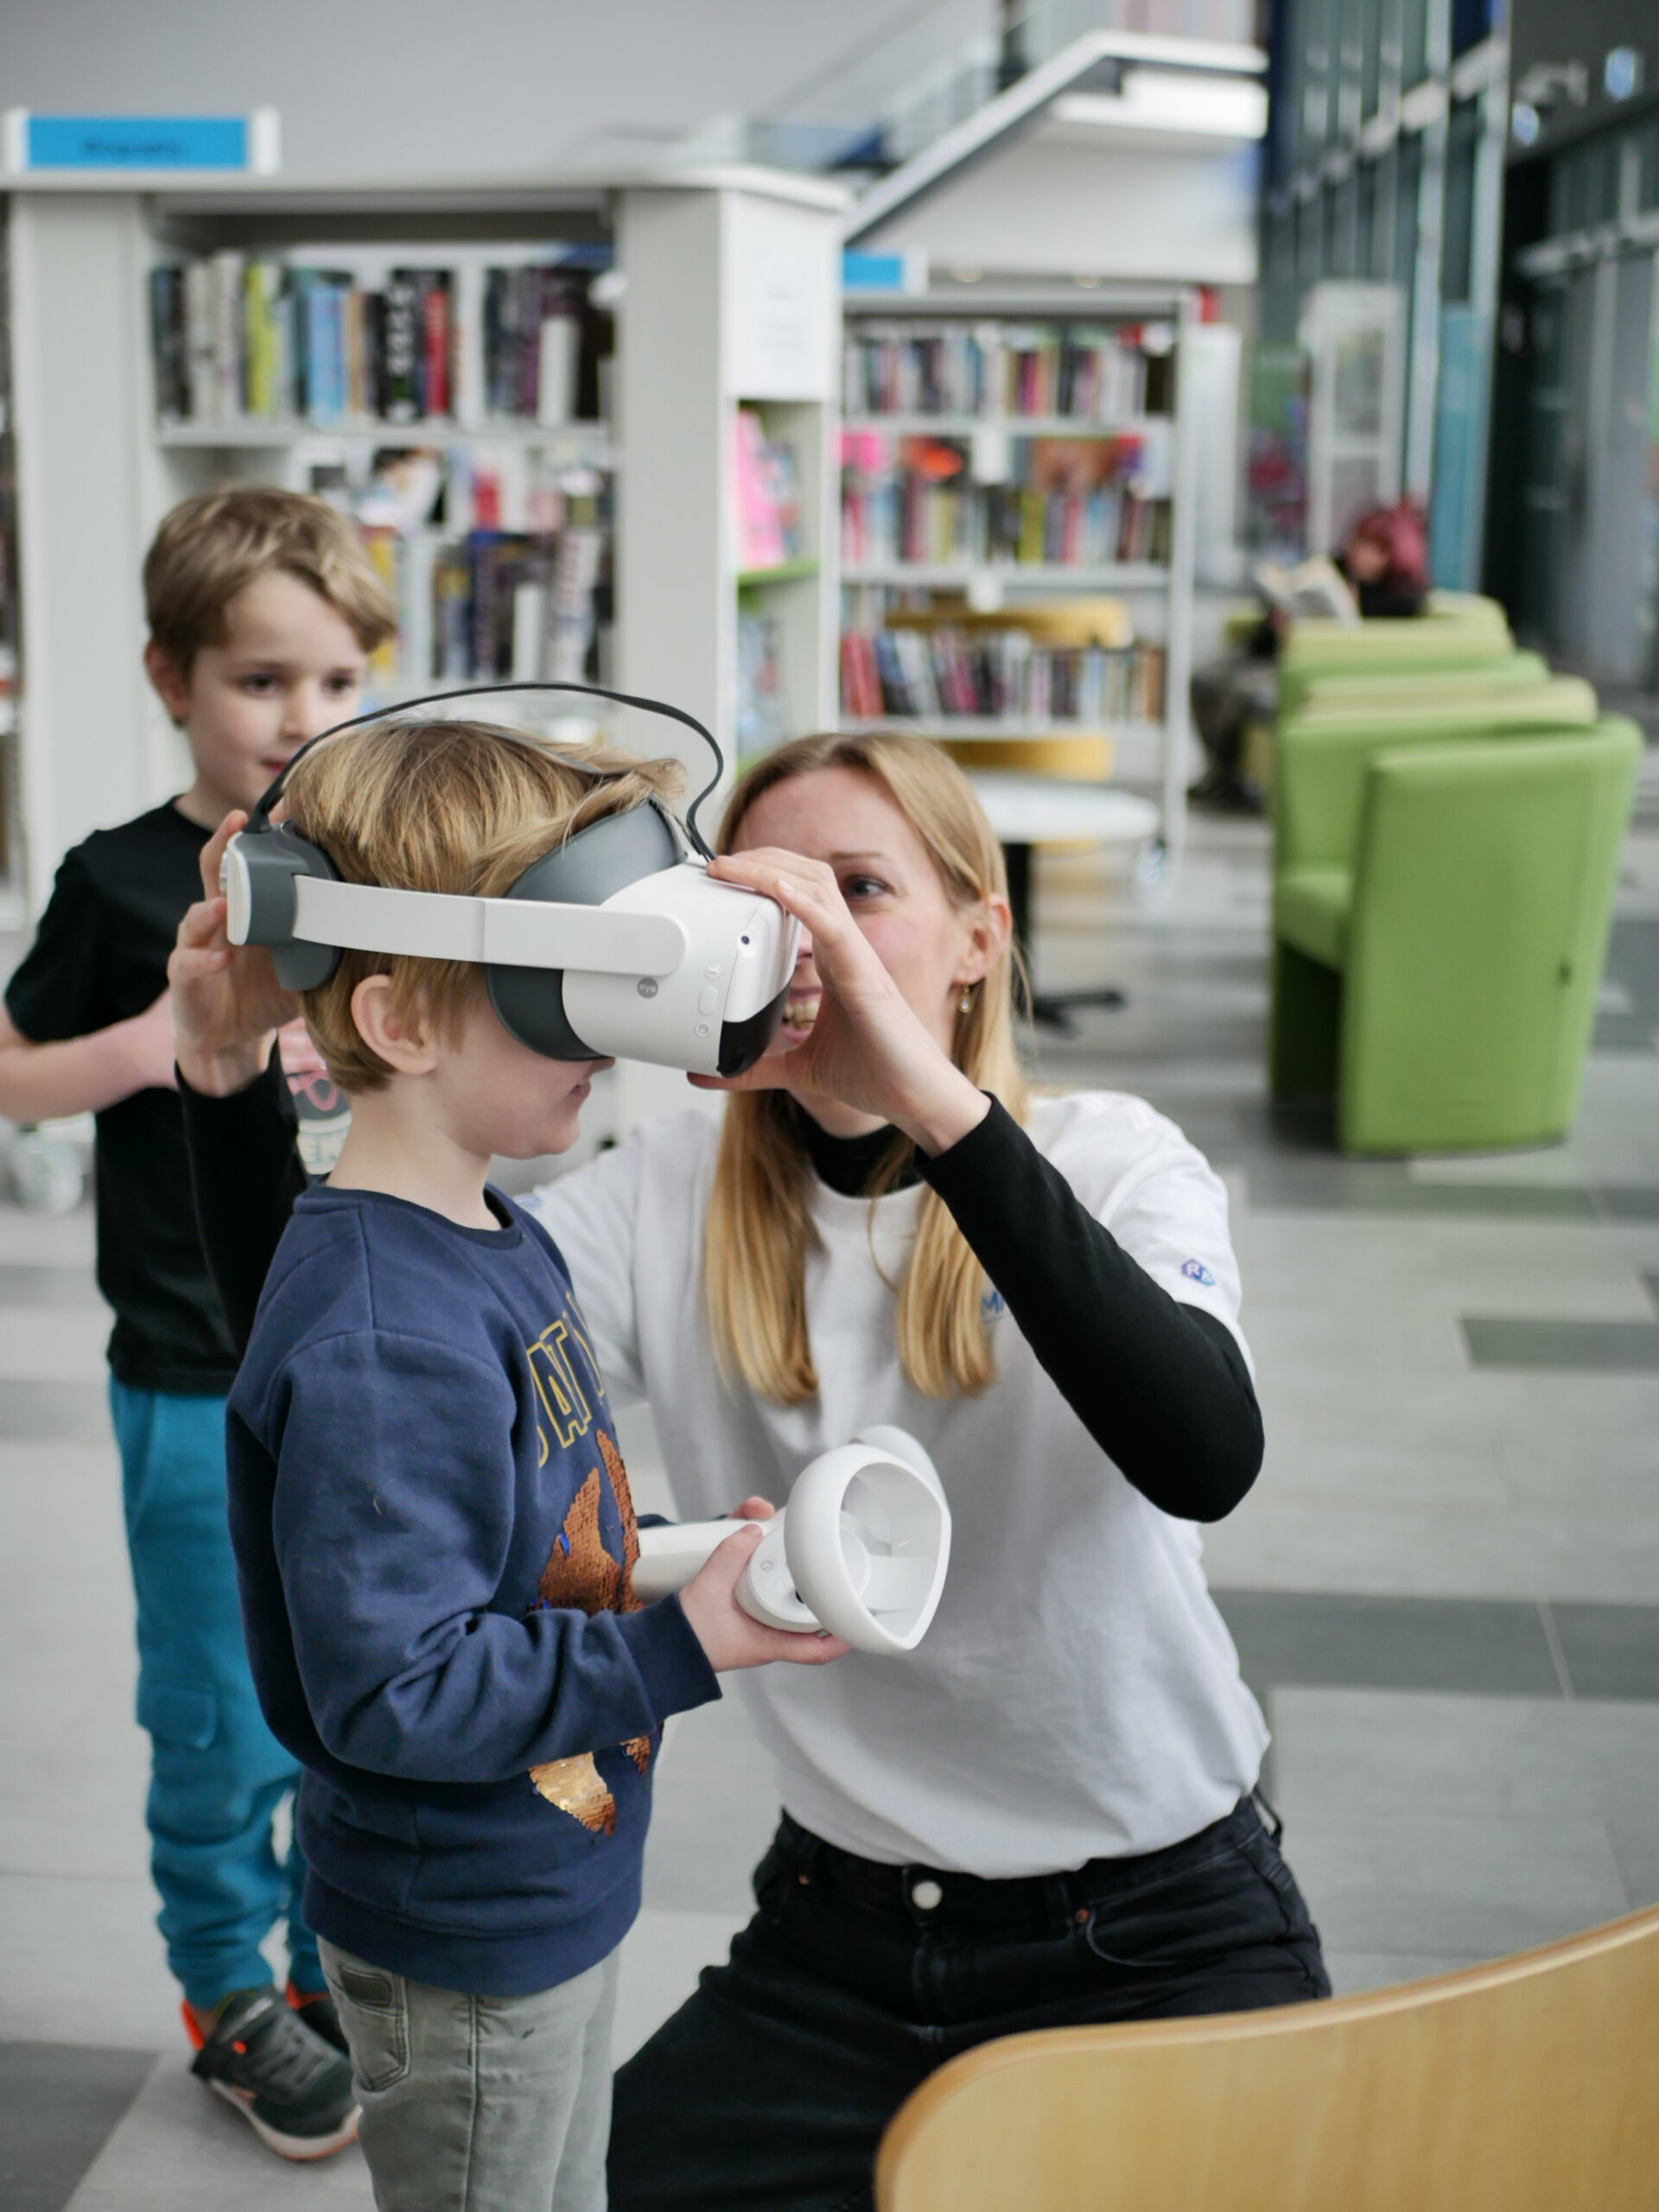 A woman is adjusting a virtual reality headset on a young child and another is watching in the background.